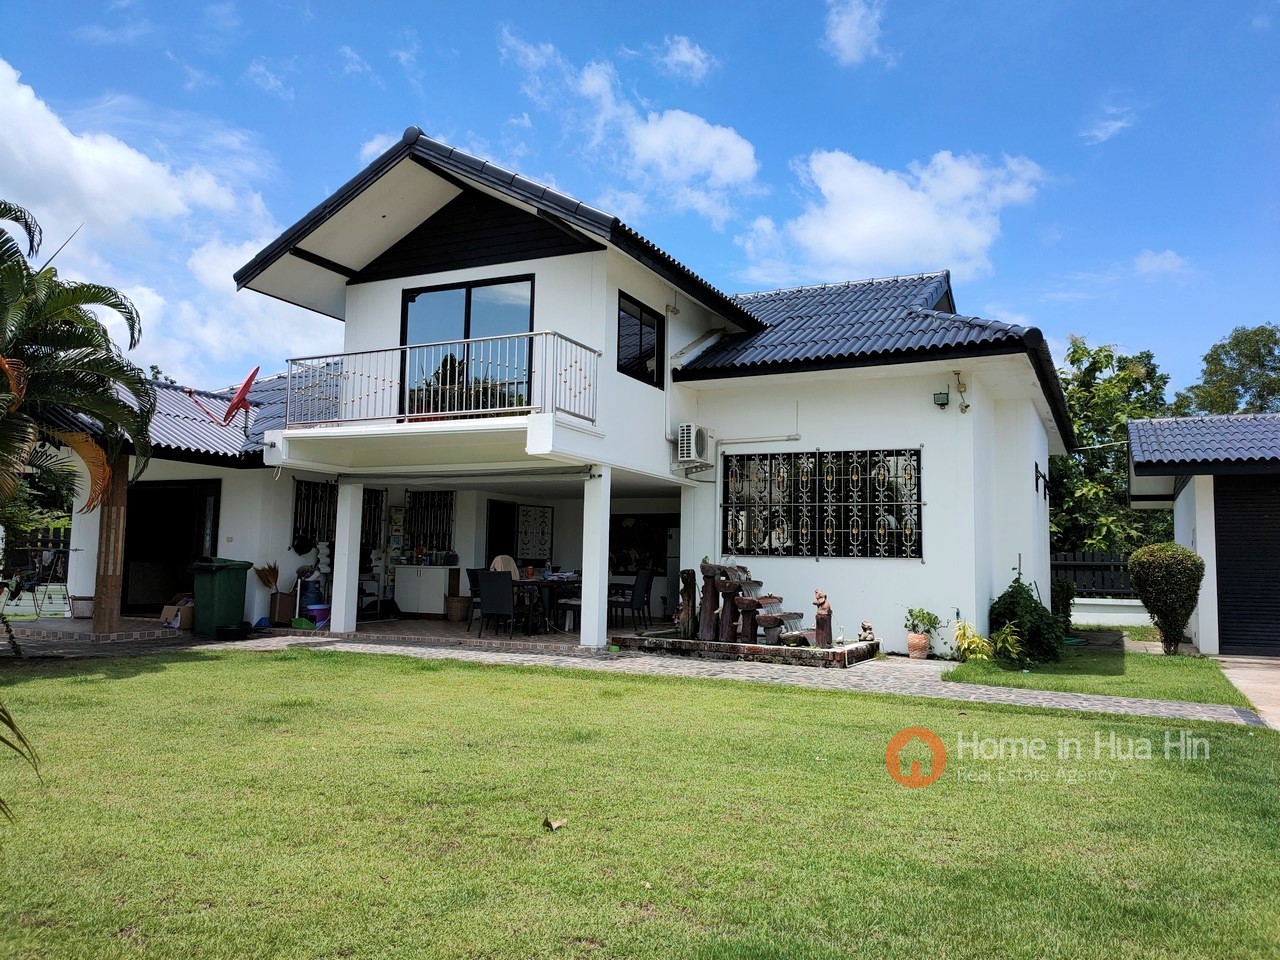 3 Bedroom House with Private Pool in Cha Am near Springfield Golf Club for SALE